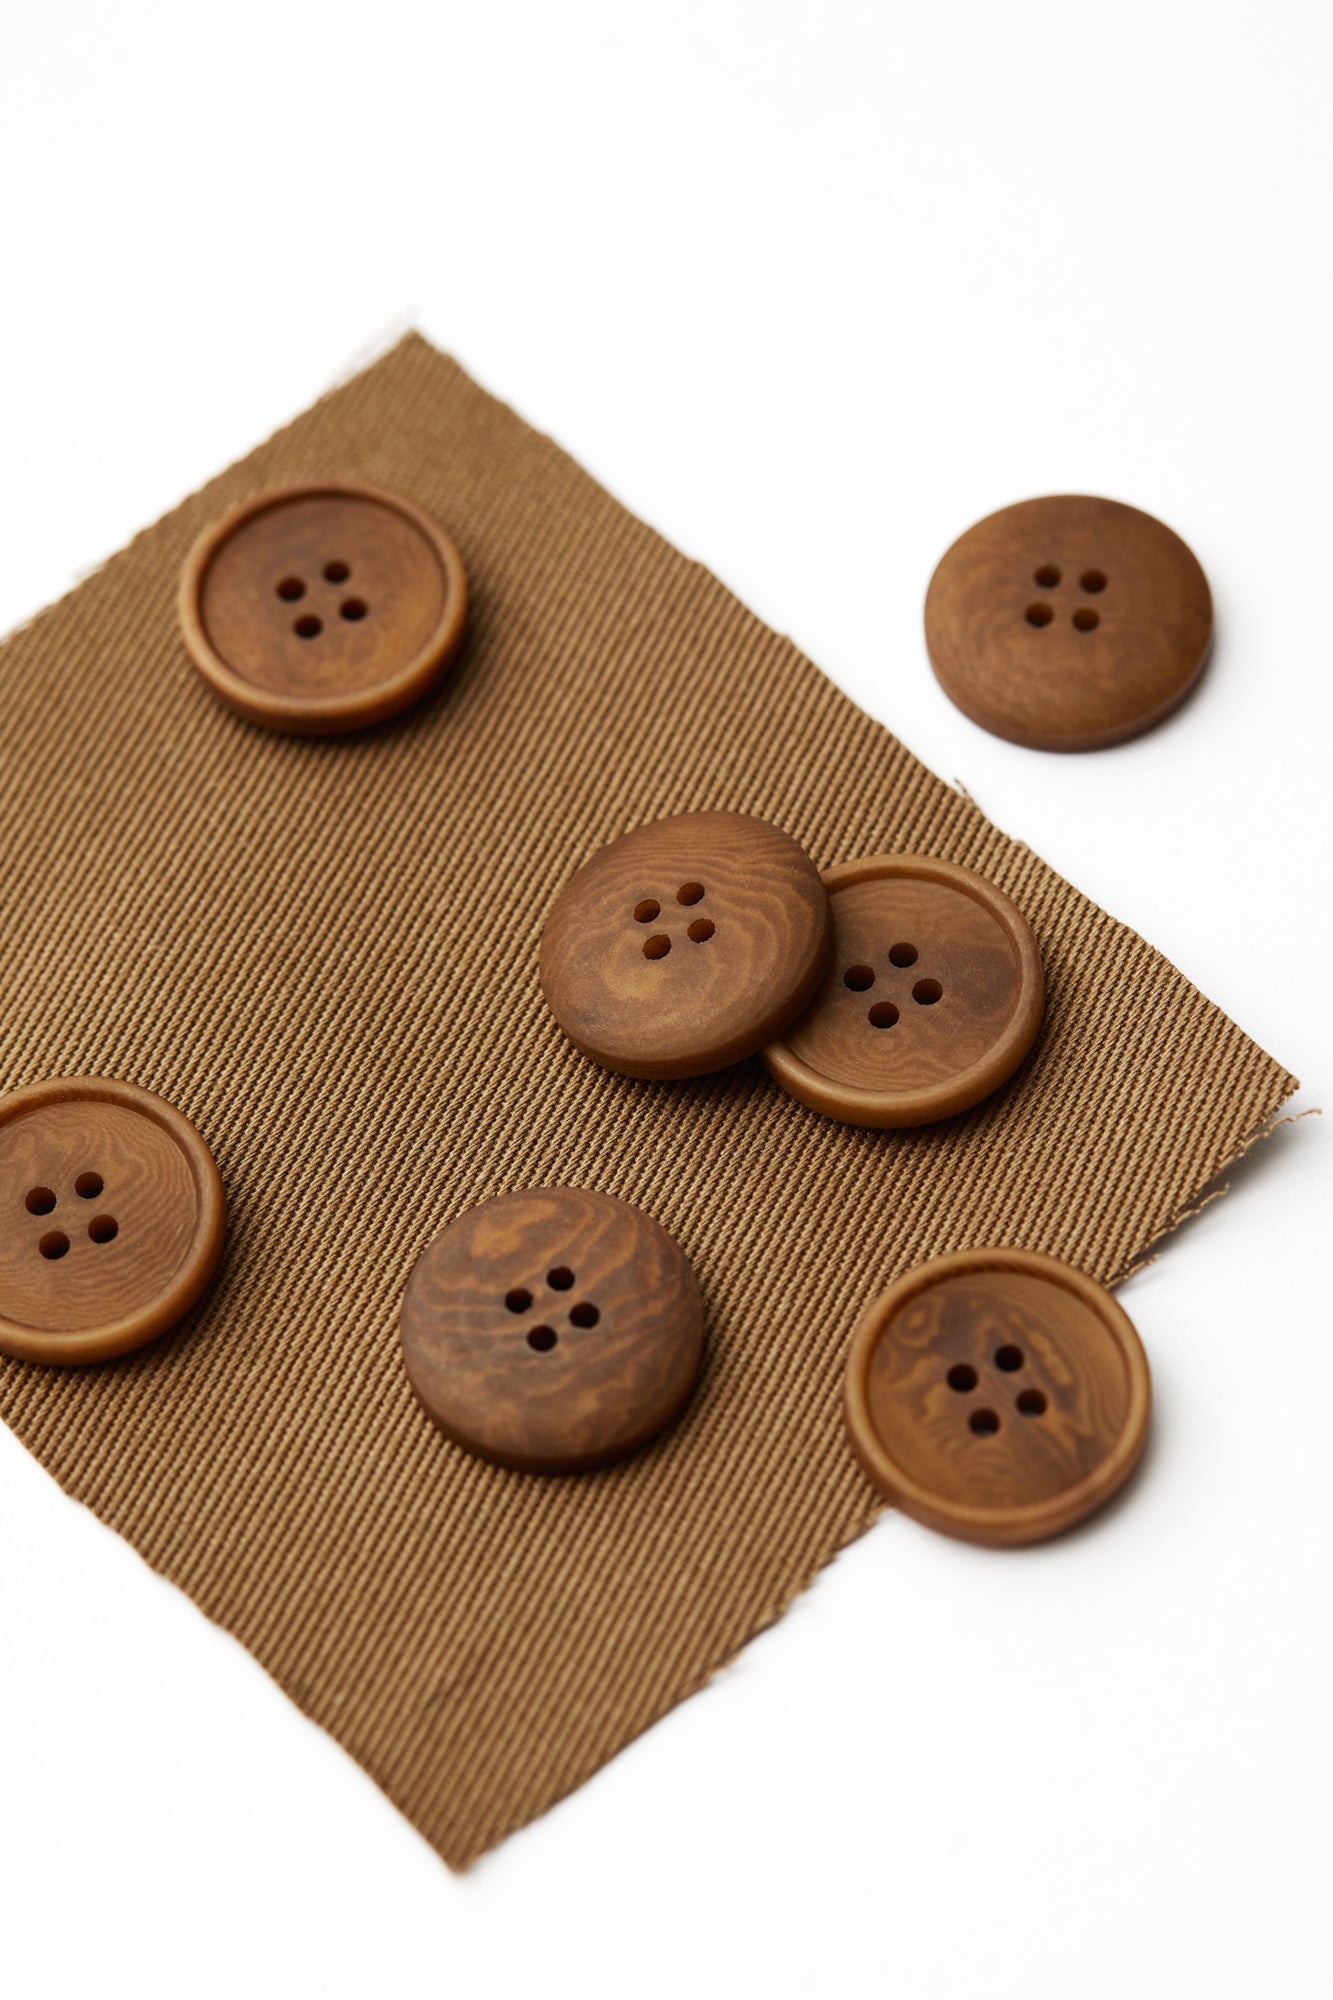 Close up of camel Corozo sewing buttons scattered on top of matching fabric swatch